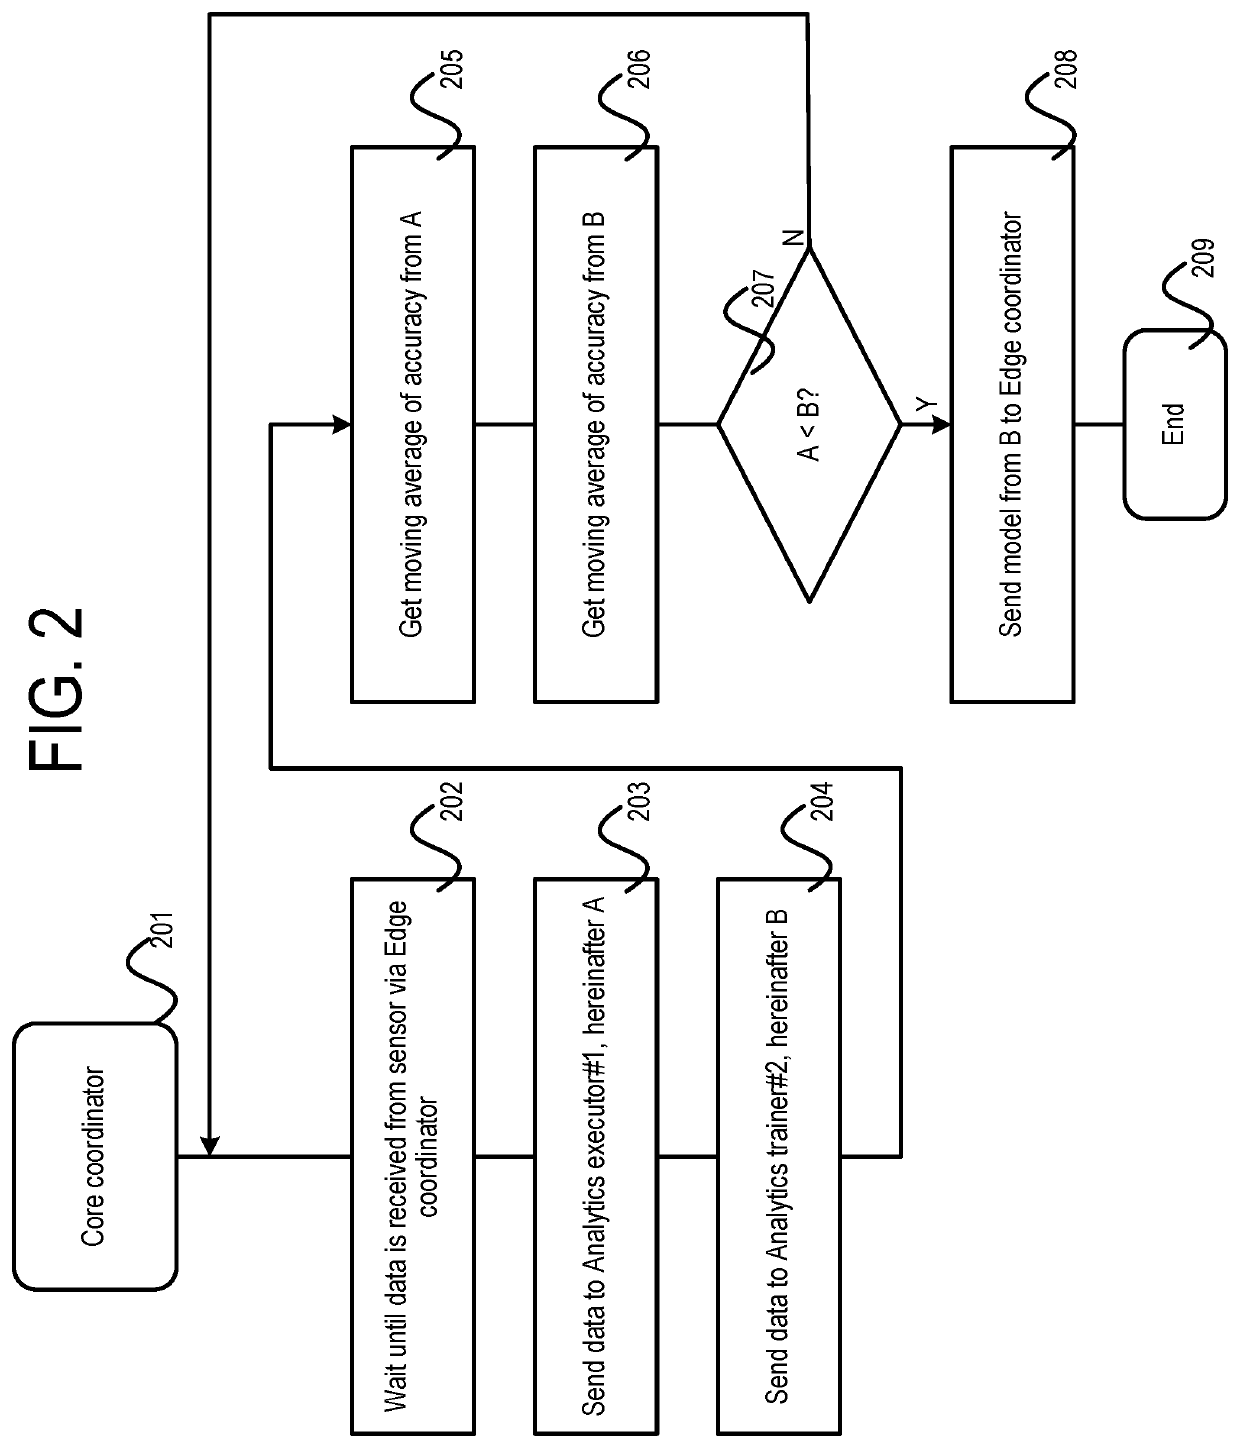 Method and system of analytics system balancing lead time and accuracy of edge analytics modules